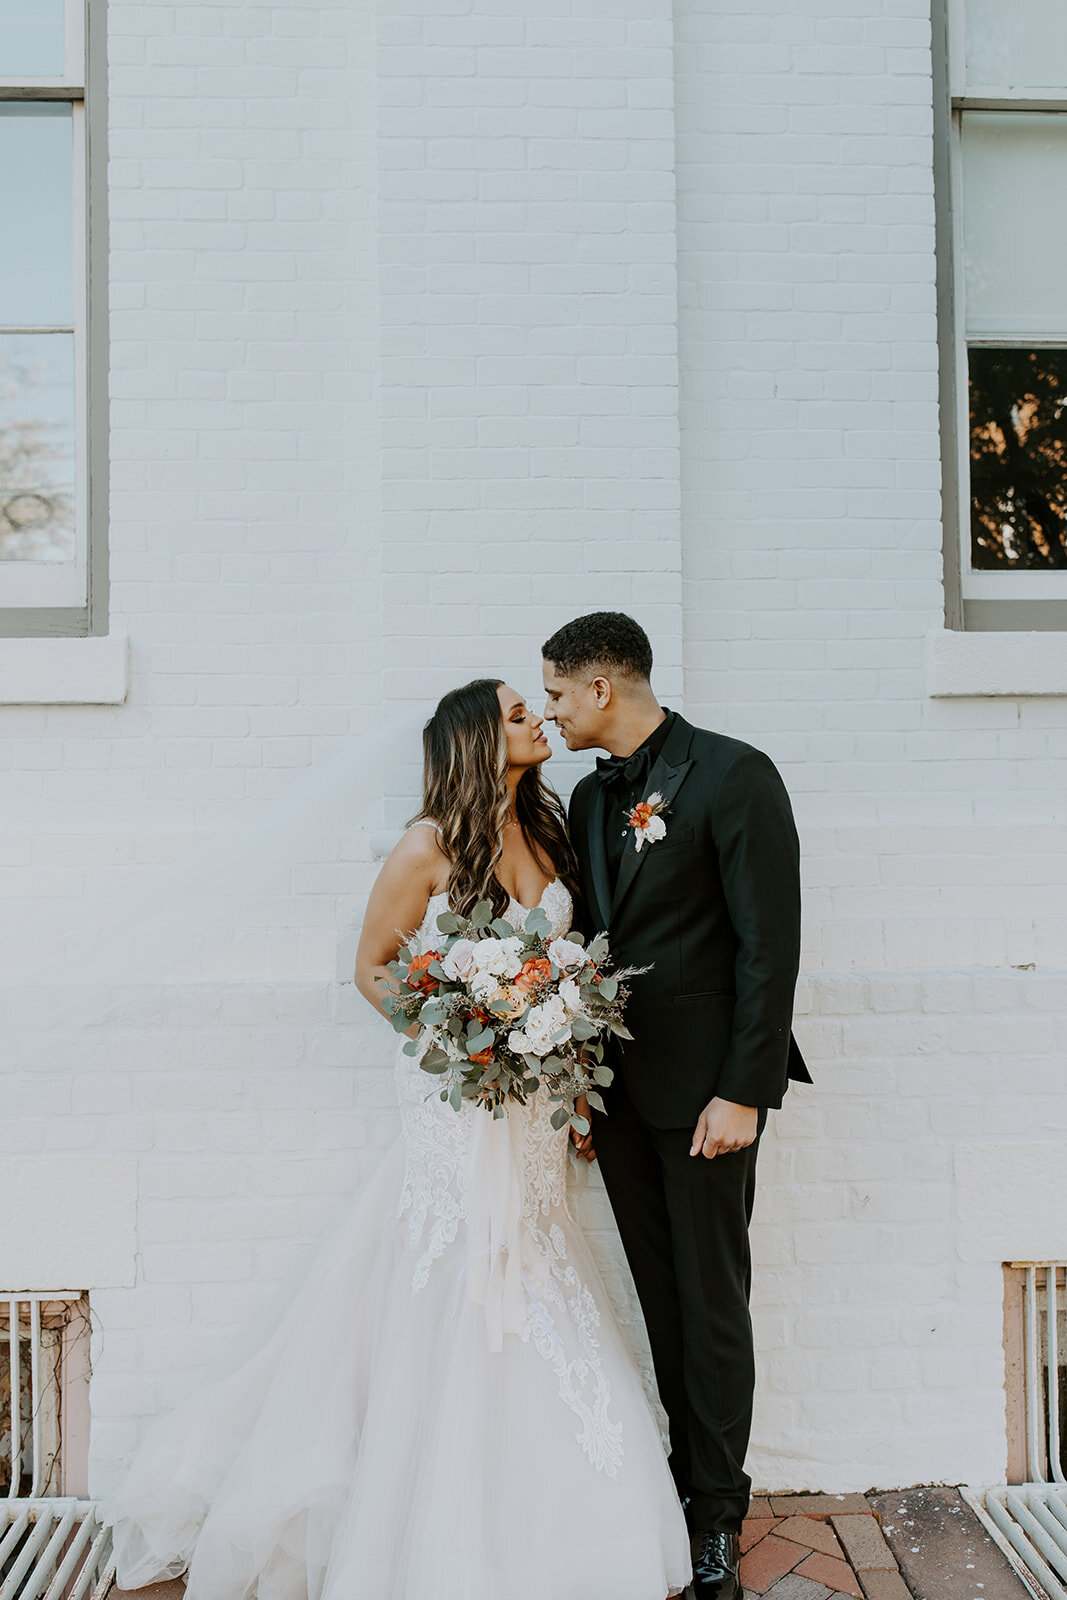 ivory-and-beau-bride-and-florals-jessica-and-ian-savannah-wedding-the-clyde-venue-boho-wedding-boho-bride-wedding-blog-maggie-sottero-wedding-dress-real-wedding-real-bride-1B8A1770.jpg